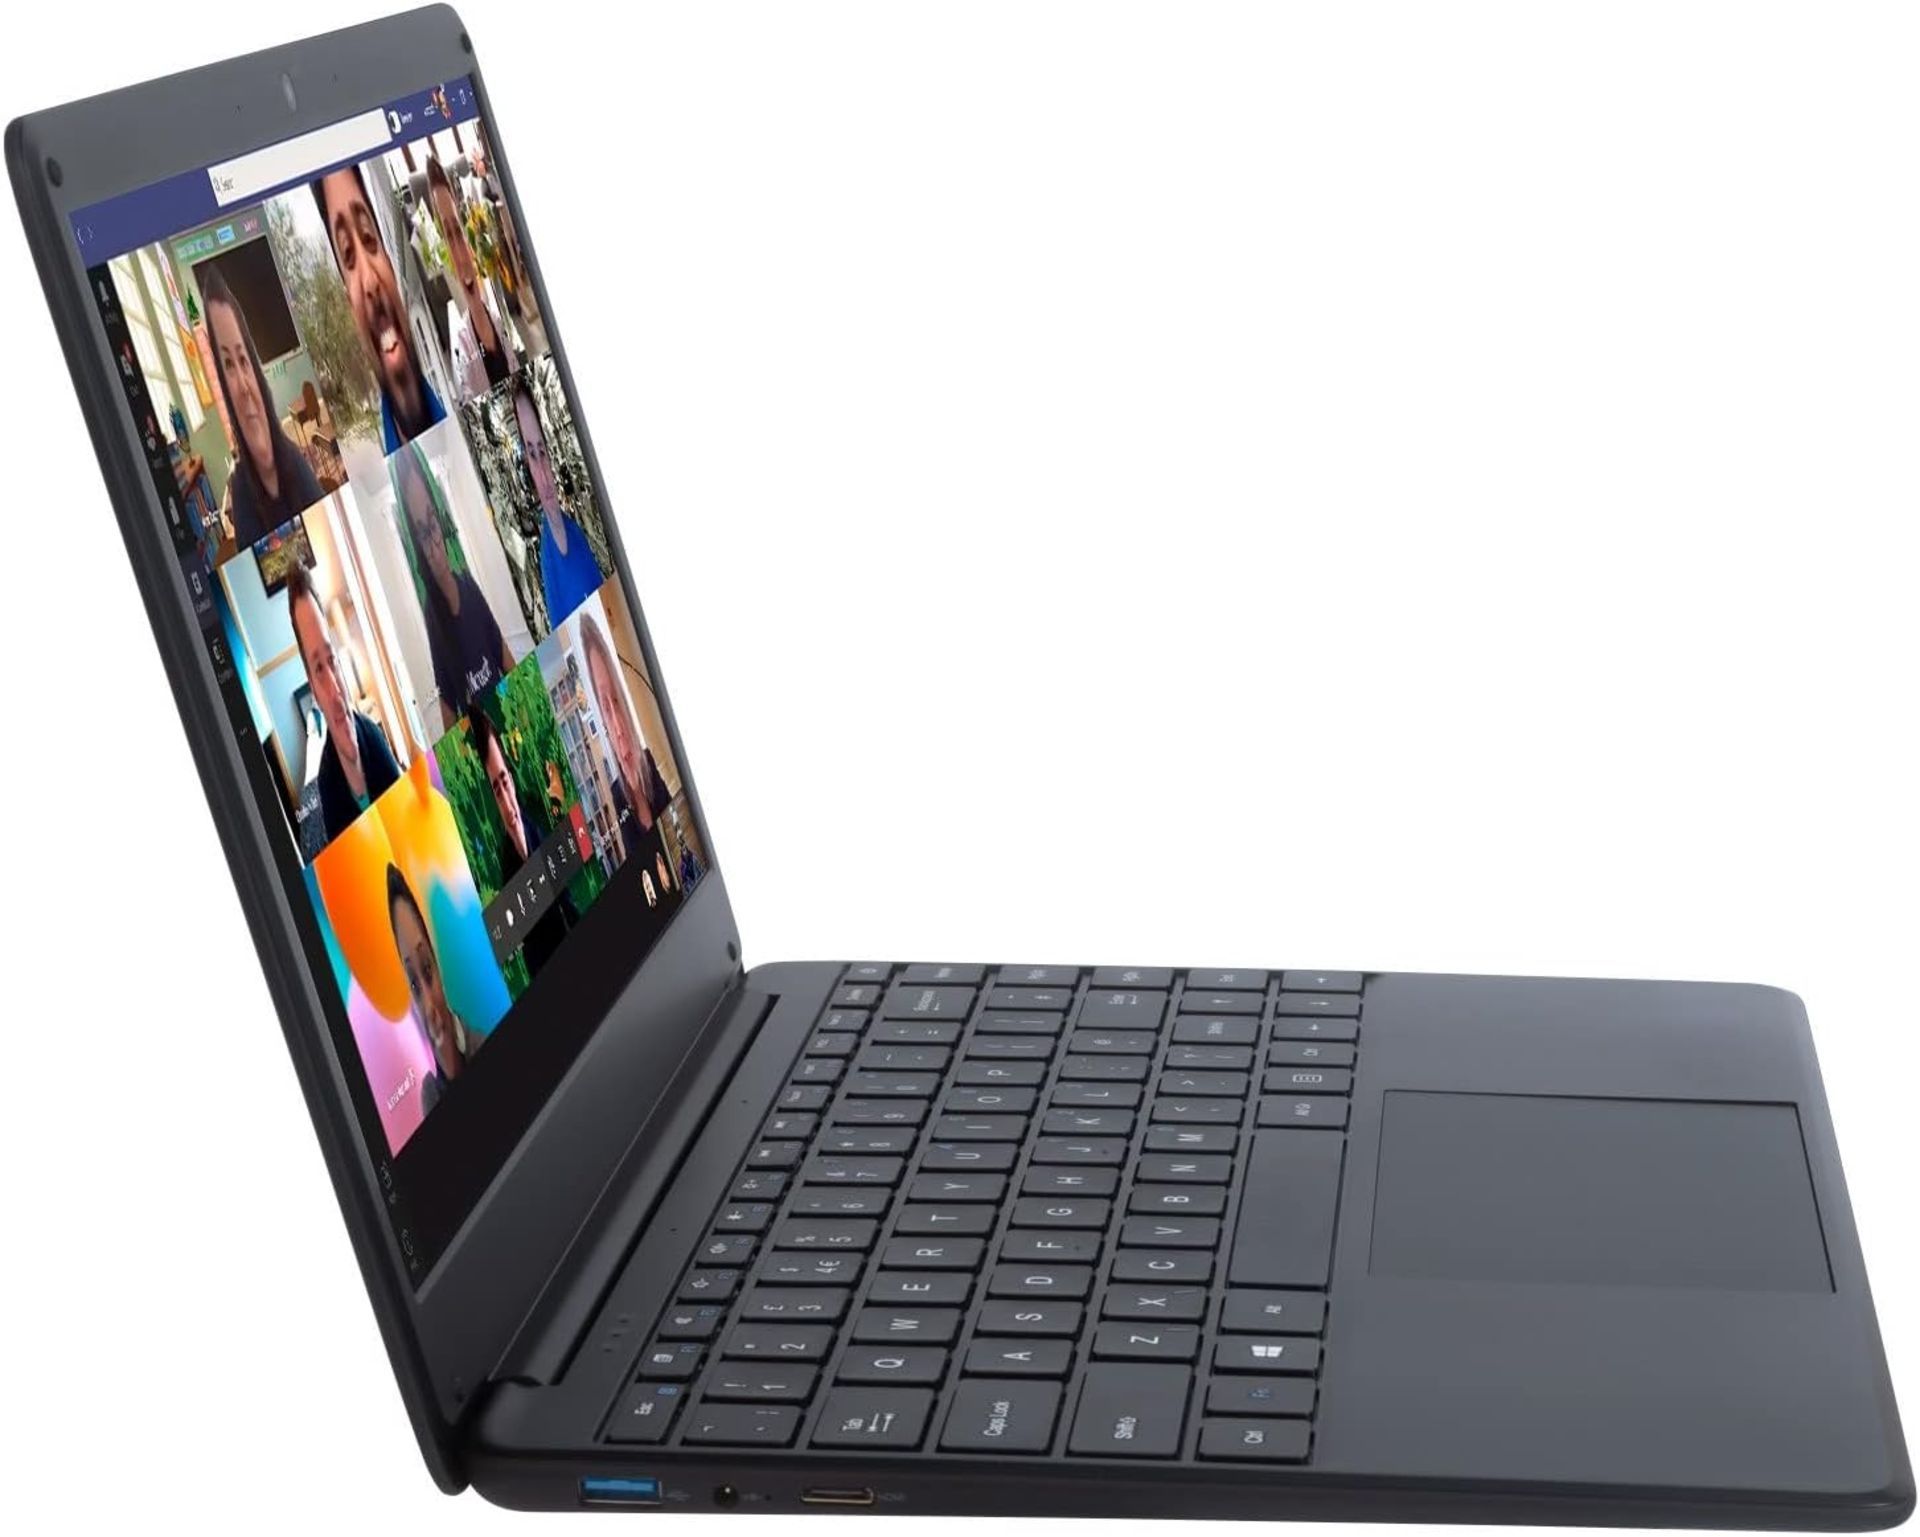 NEW & BOXED CODA 1.4 CODA043 14 Inch Laptop. RRP £199.99. (SR). Operating system Windows 10S, SSD - Image 6 of 7